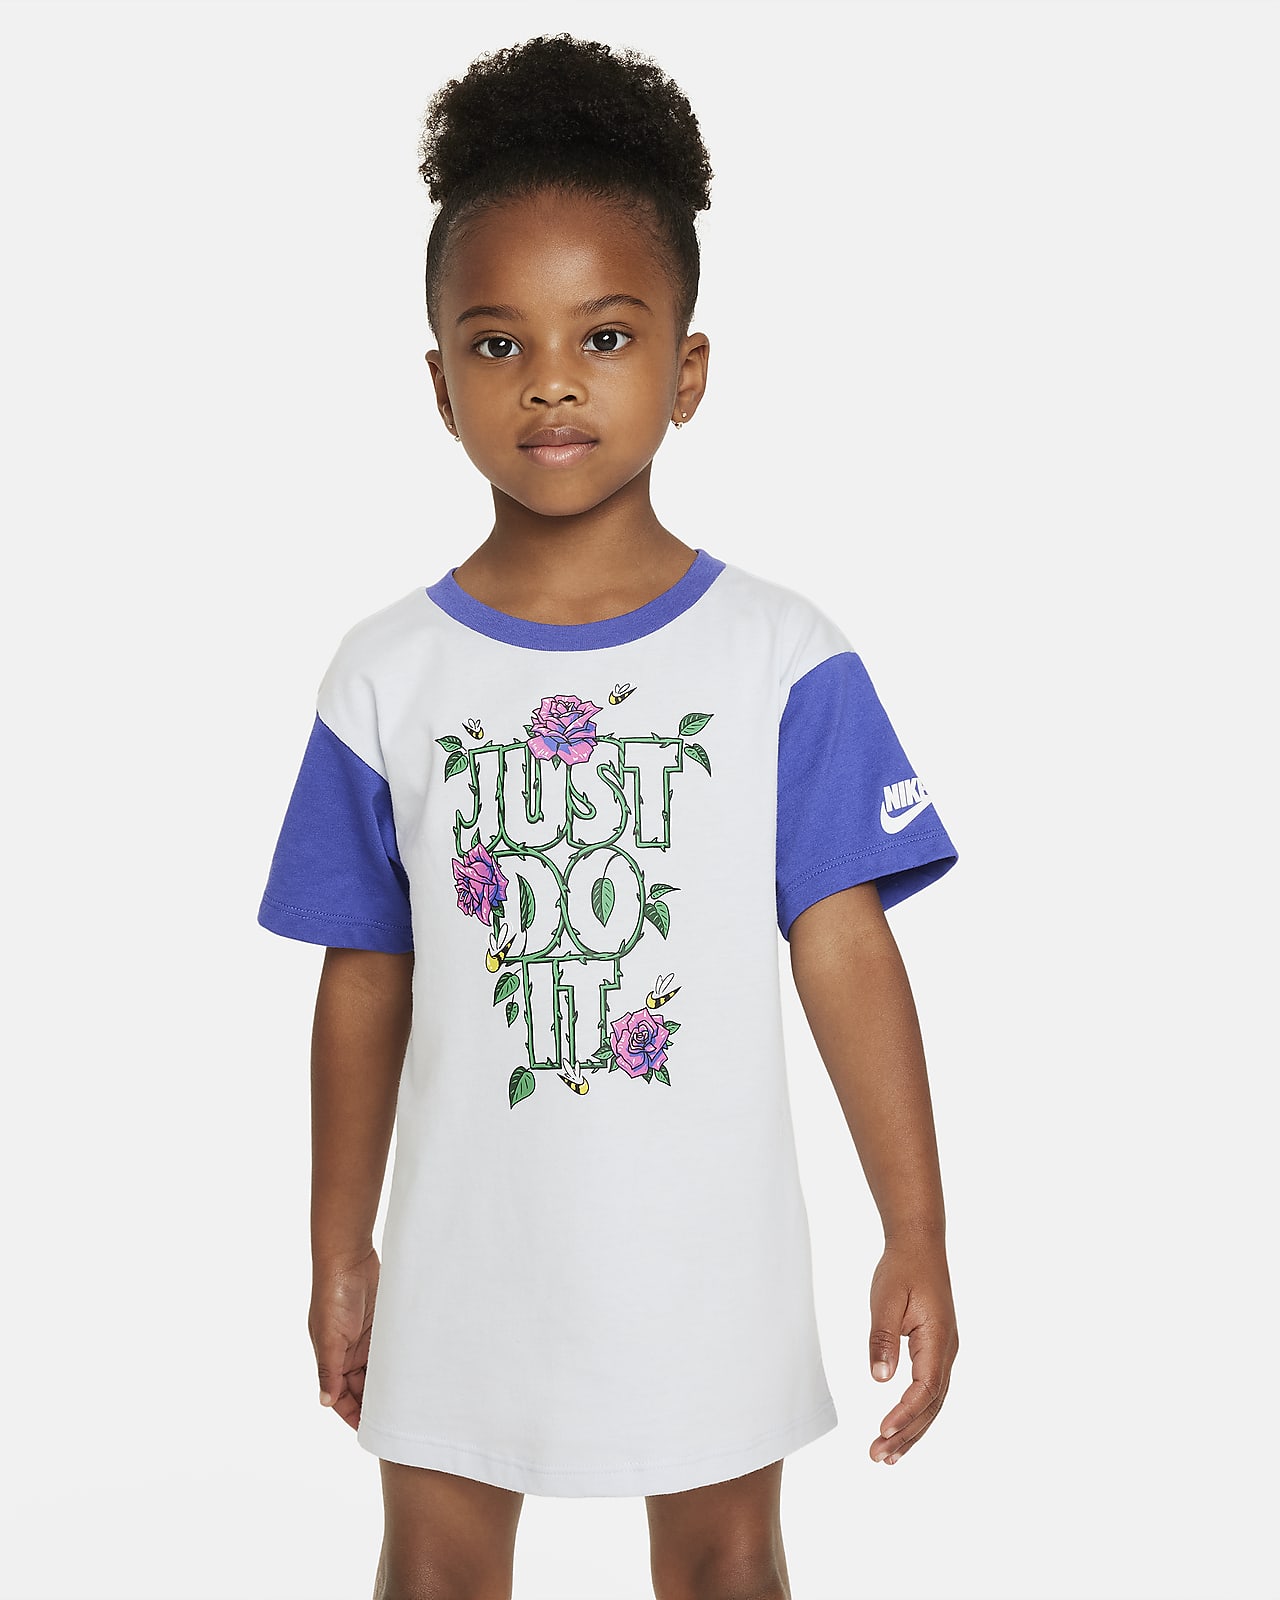 Kids' Easy Tee, Tunic, and Dress - 5 out of 4 Patterns